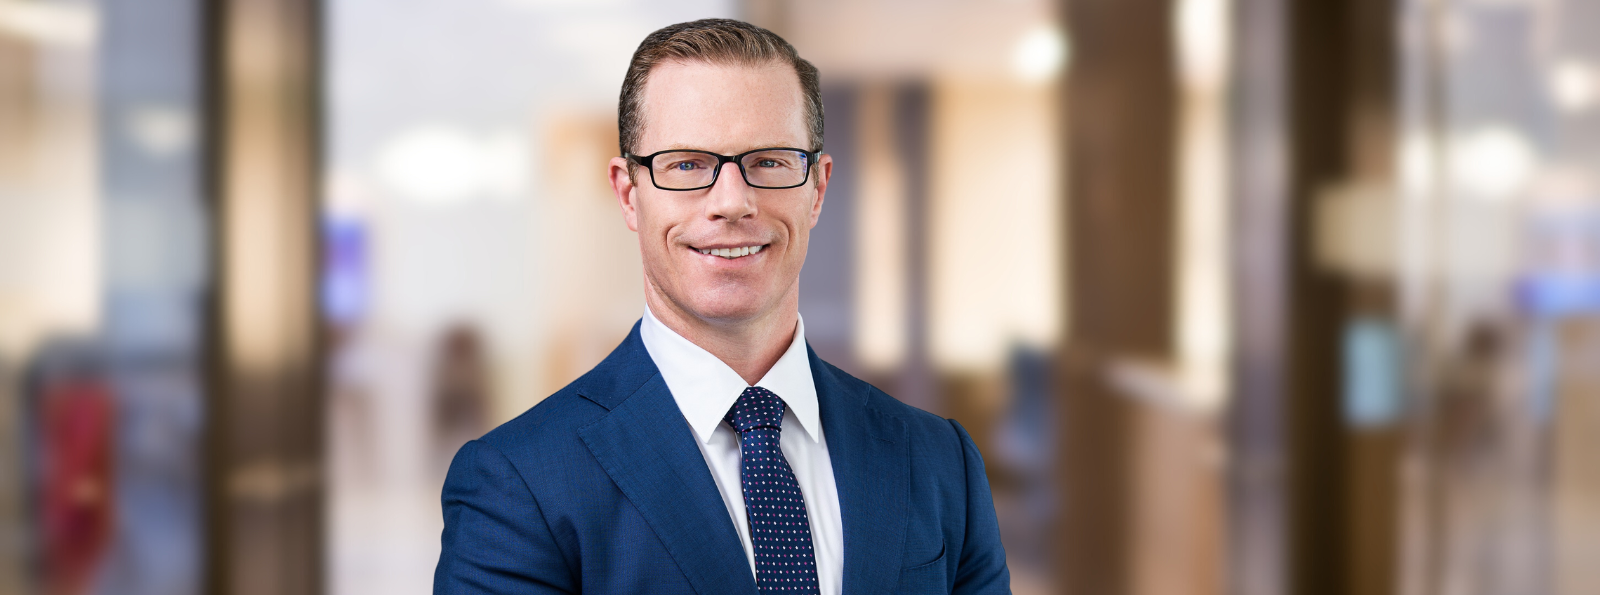 Casey Mclean, portfolio manager for the Fidelity Australian Opportunities Fund